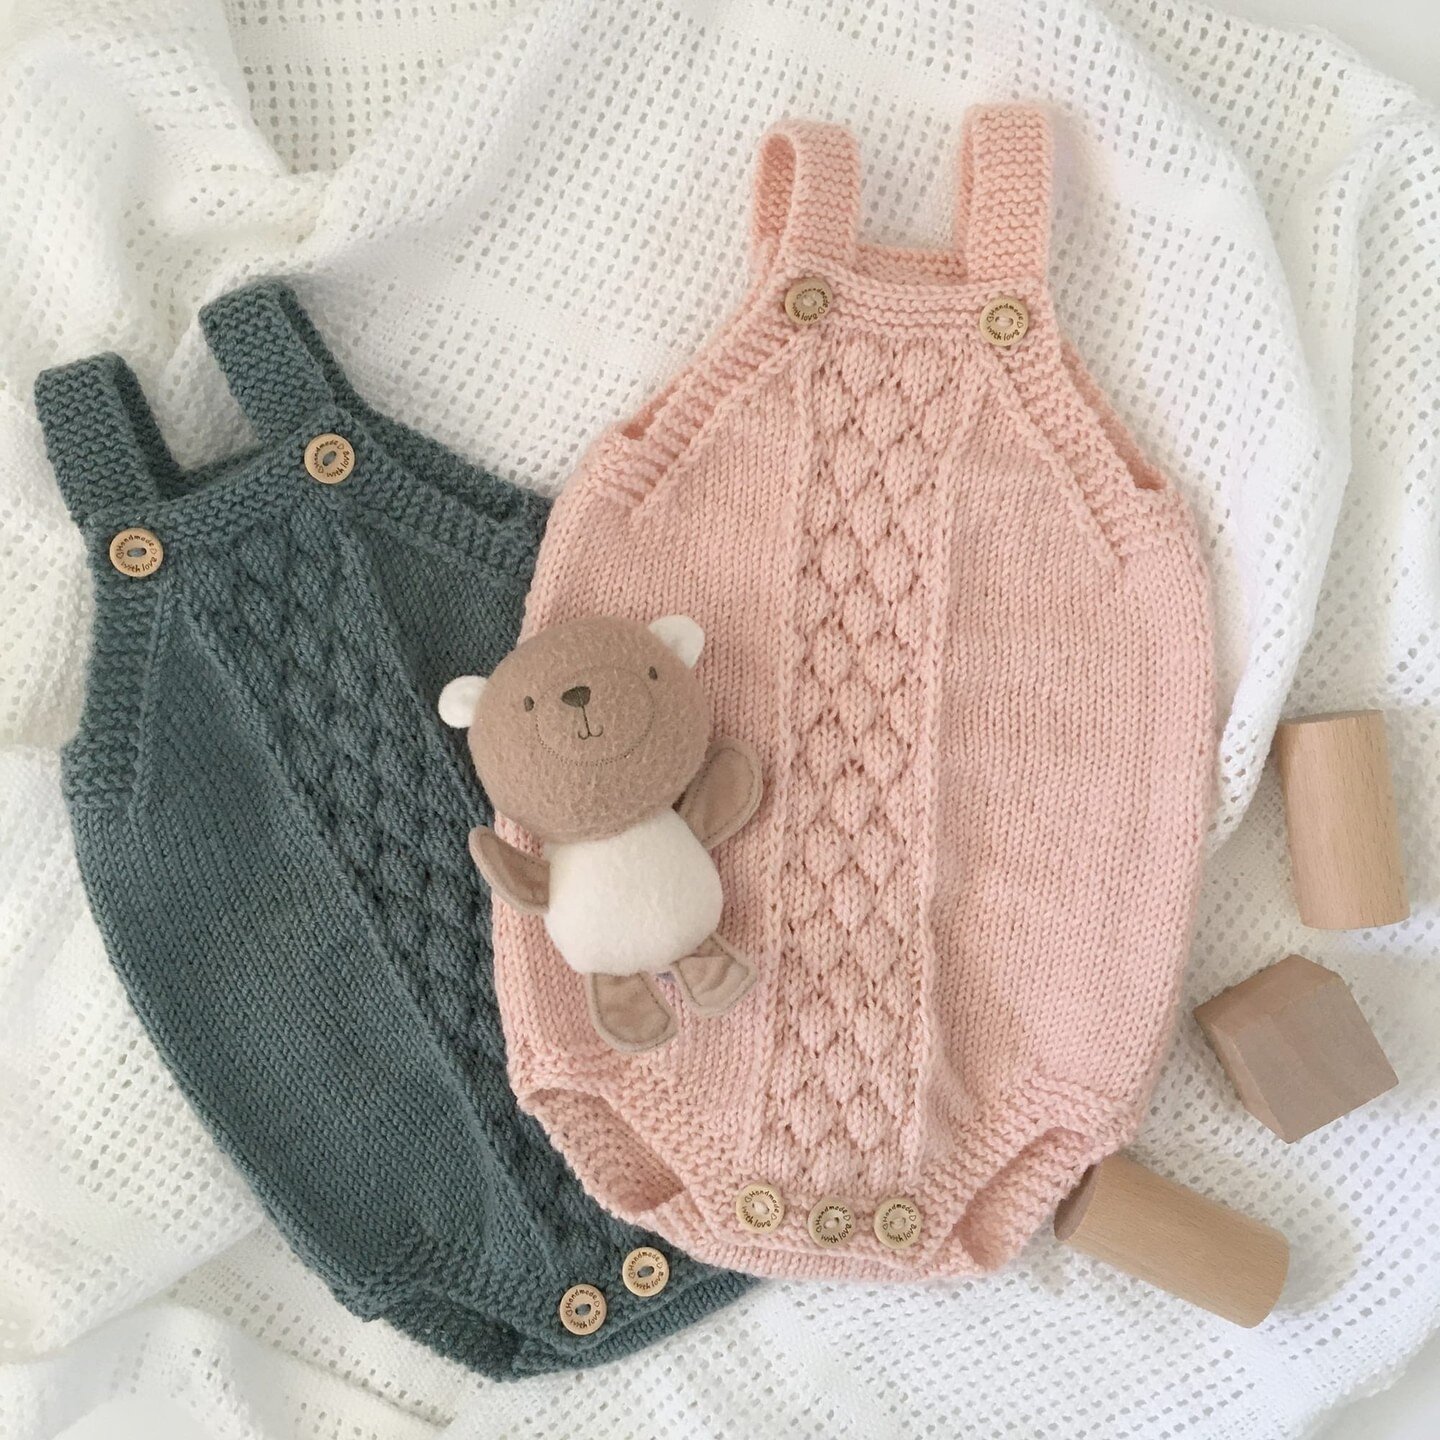 Bubble Stitch romper knitted in Rico Essentials Merino DK shades Patina and Pearl Pink. Pattern includes sizes from newborn to 2 years⁣
#bubblestitchromper #bubblestitch #romperpattern #babyromper #babyromperpattern #knittingpattern #lovefibrespattte